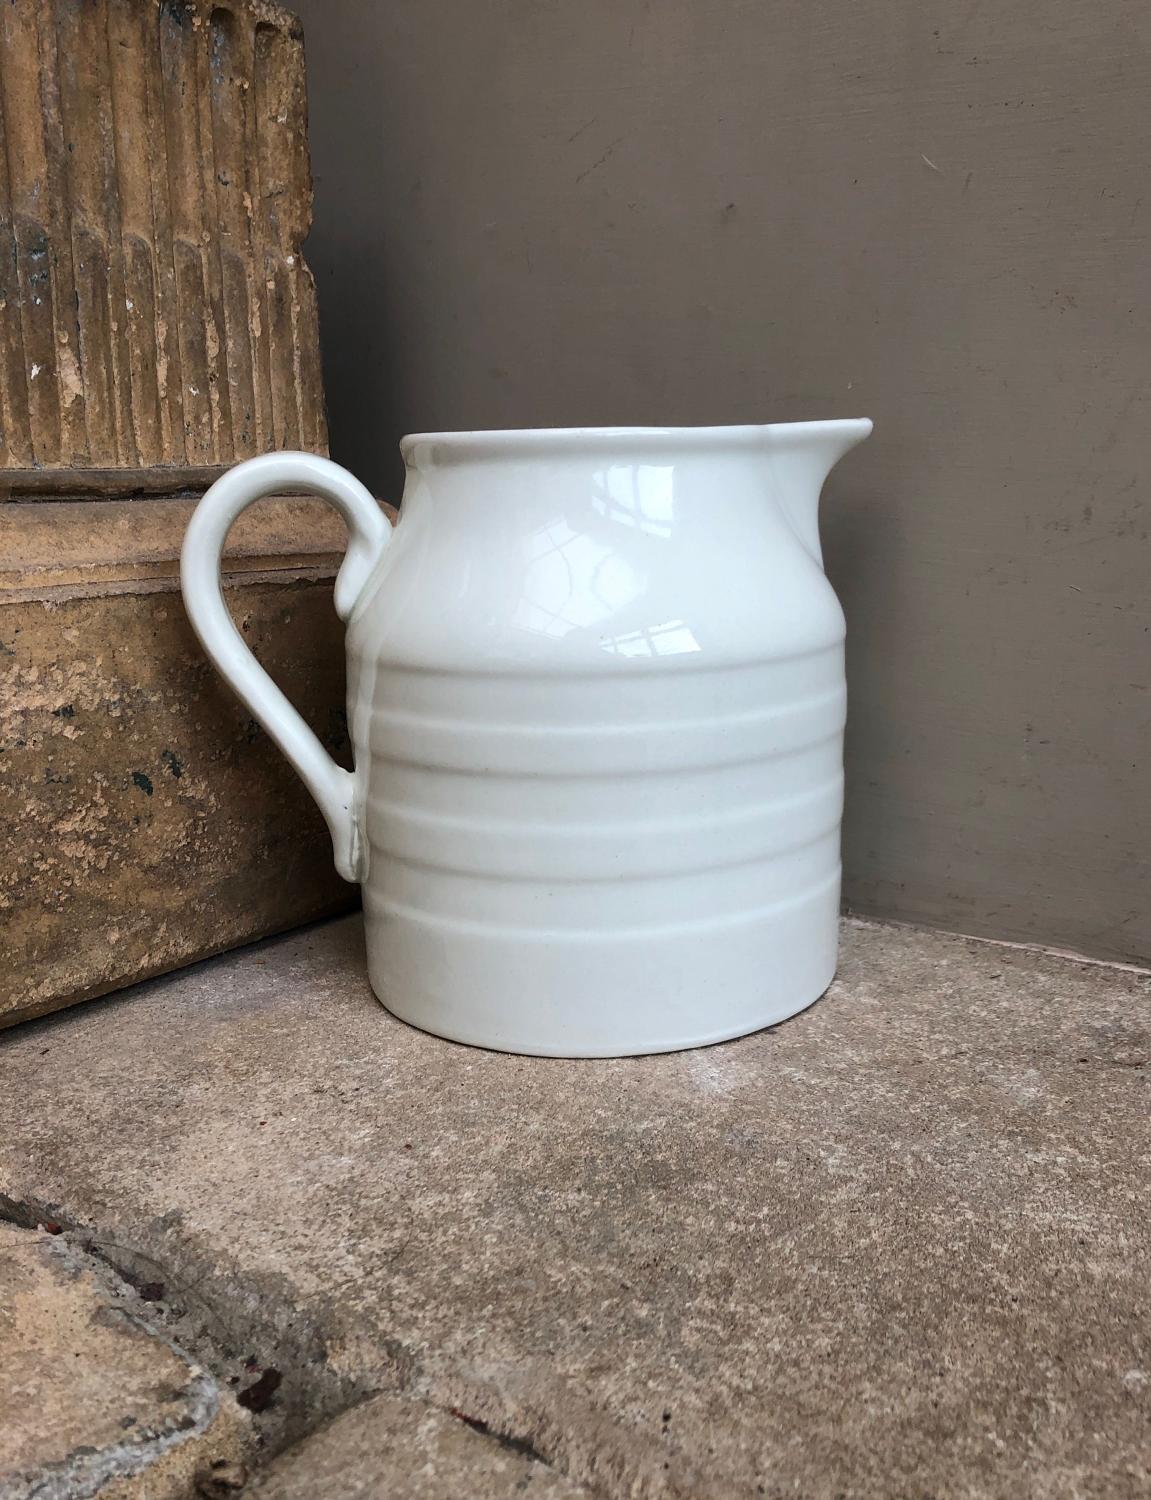 Early 20th Century White Banded Dairy Milk Jug - 4 Pints